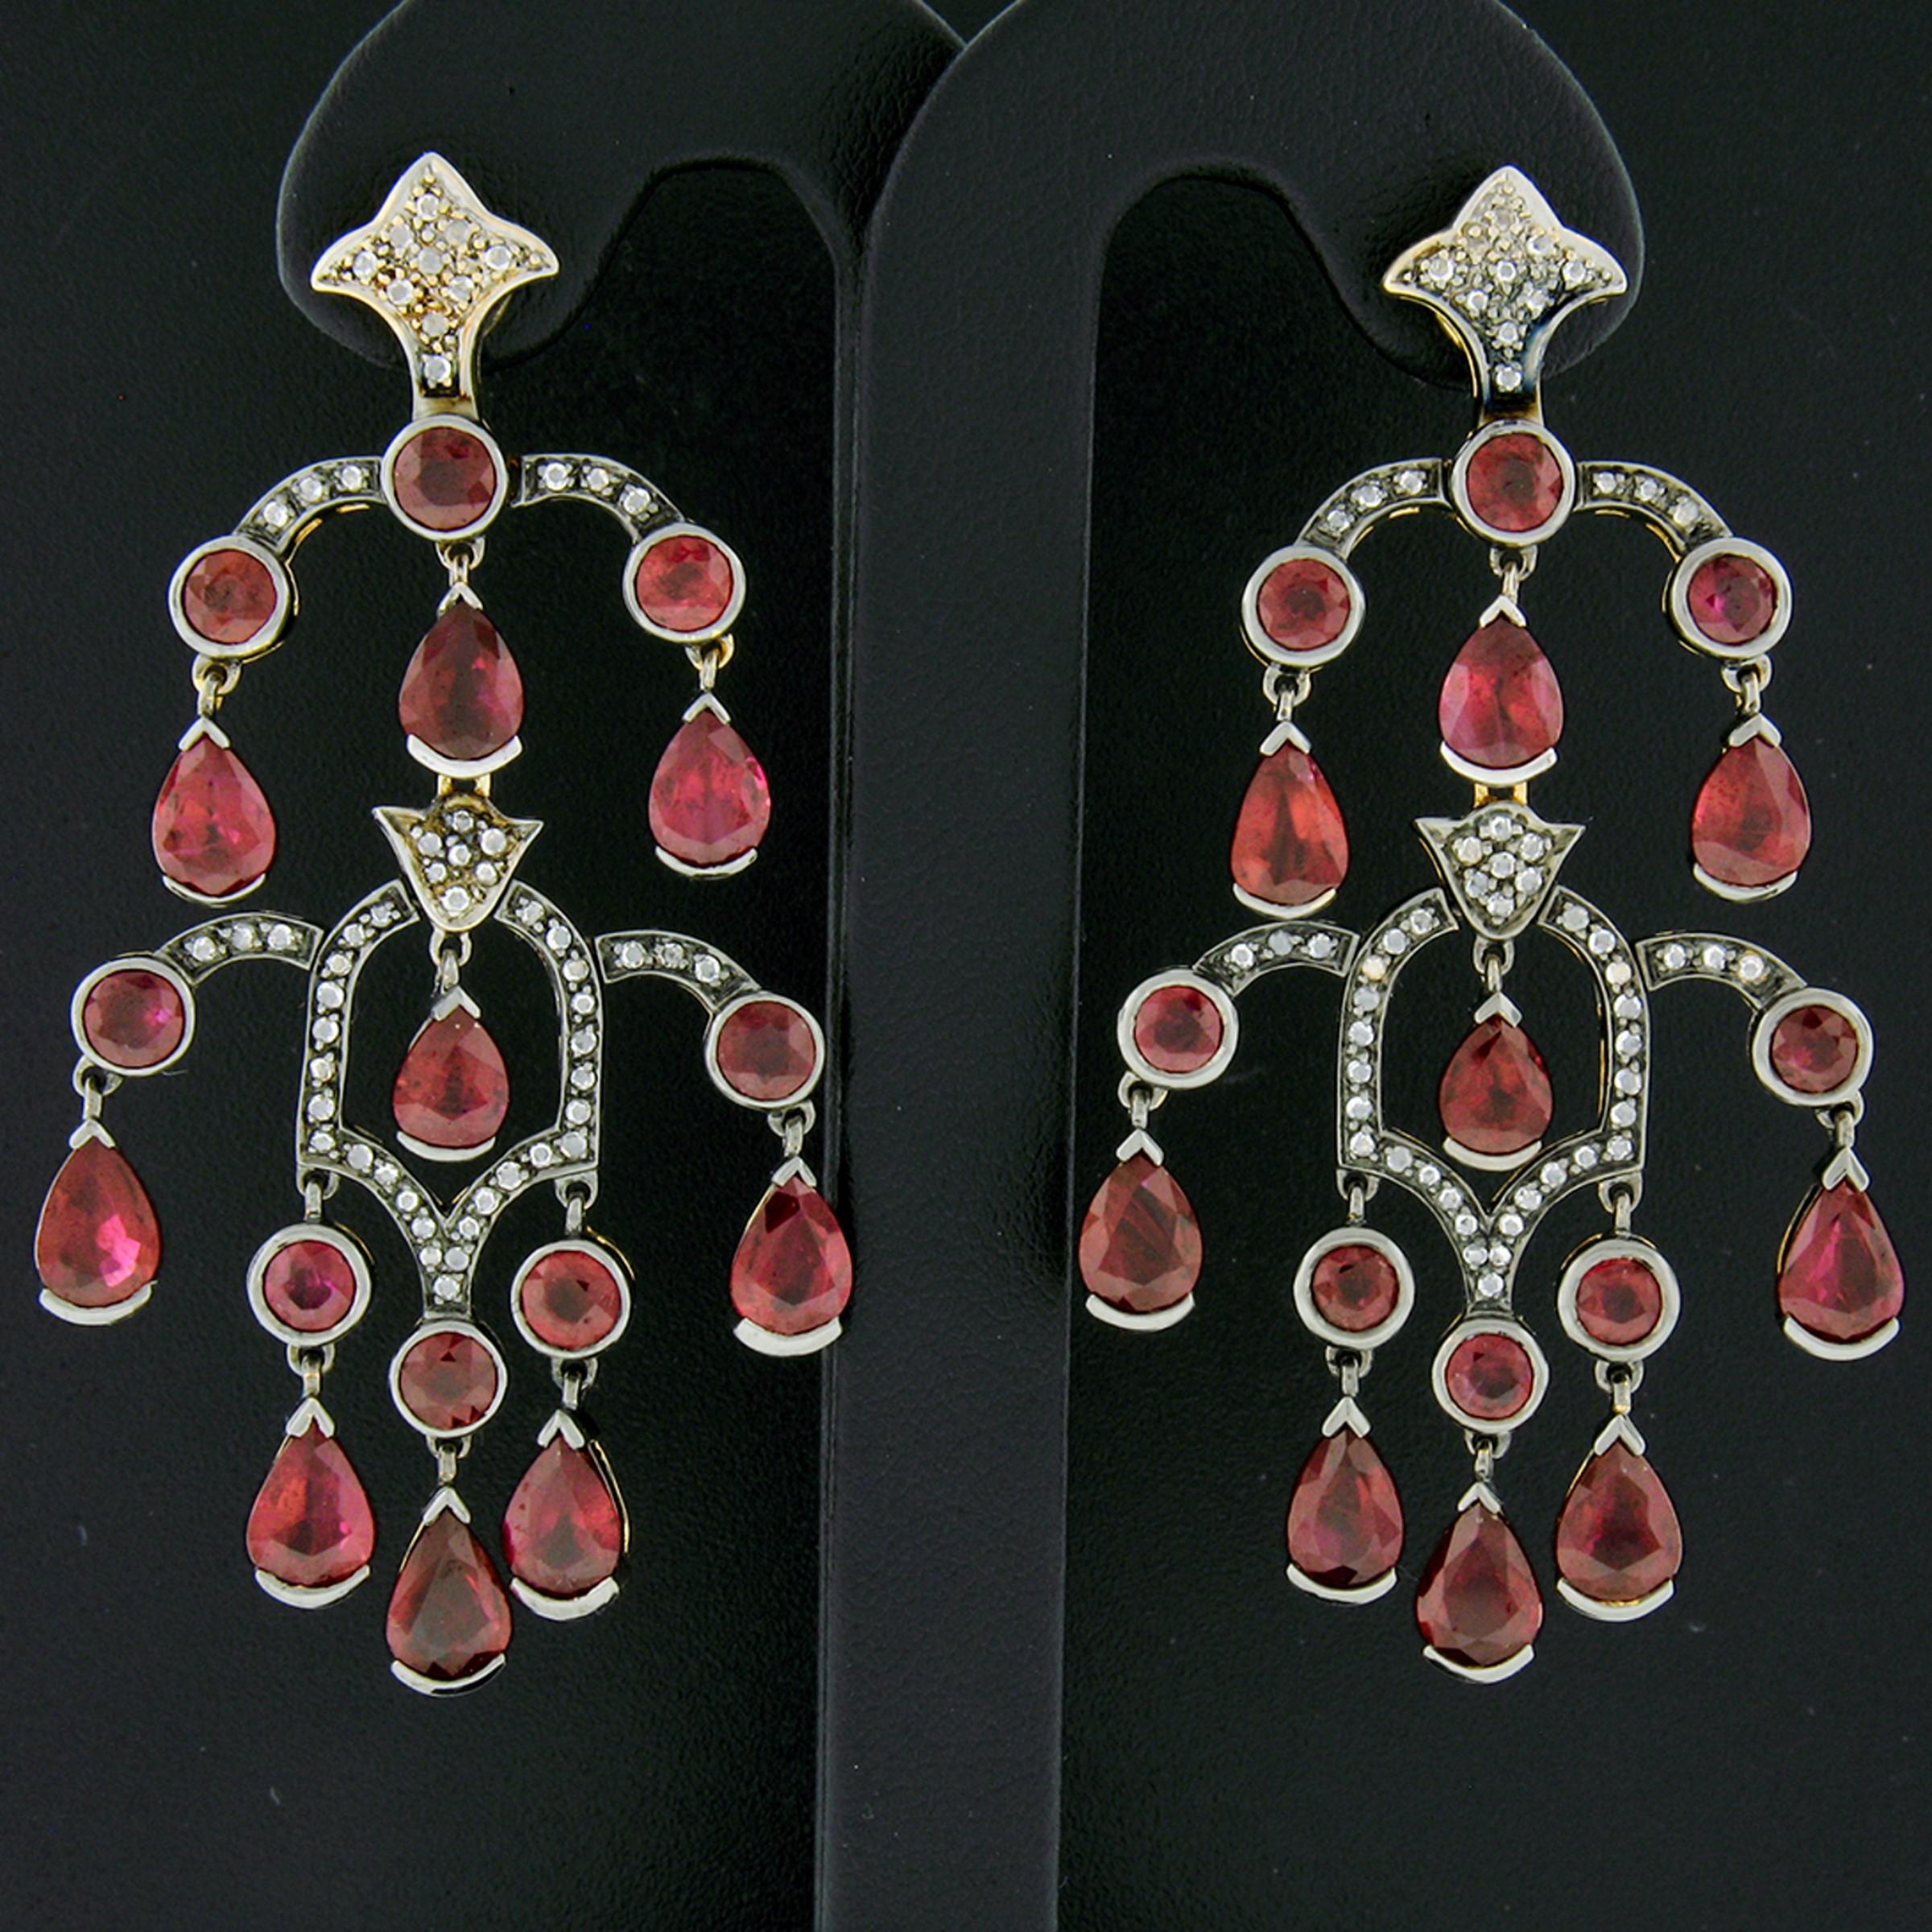 This gorgeous and large pair of drop chandelier earrings were crafted from solid 18k black gold with yellow gold backings and feature fine rubies and diamonds throughout. The rubies consist of both round brilliant and pear cut, in which 2 of the